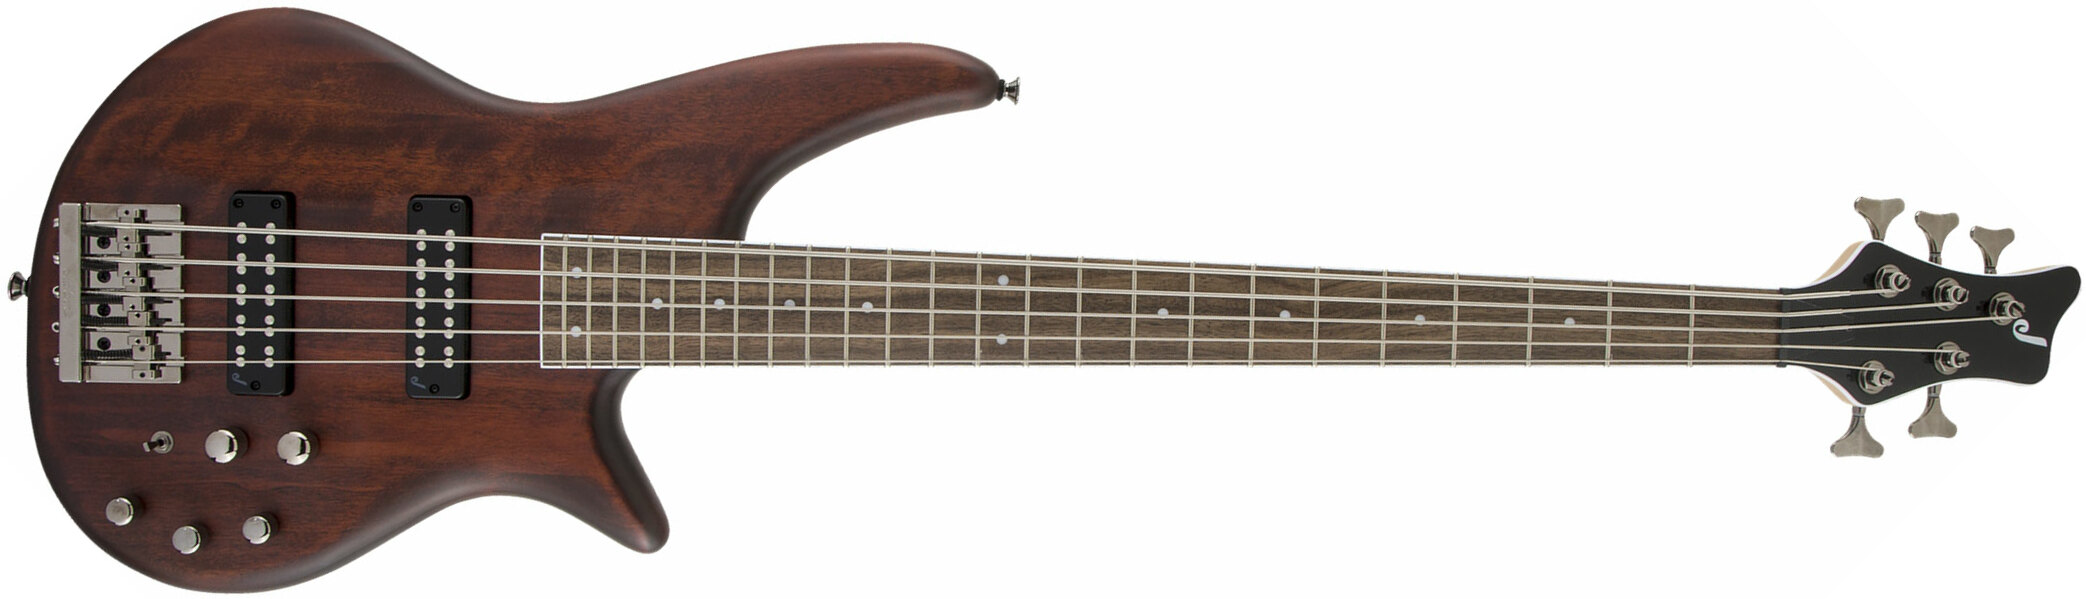 Jackson Spectra Bass Js3v 5c Active Lau - Walnut Stain - Solidbody E-bass - Main picture